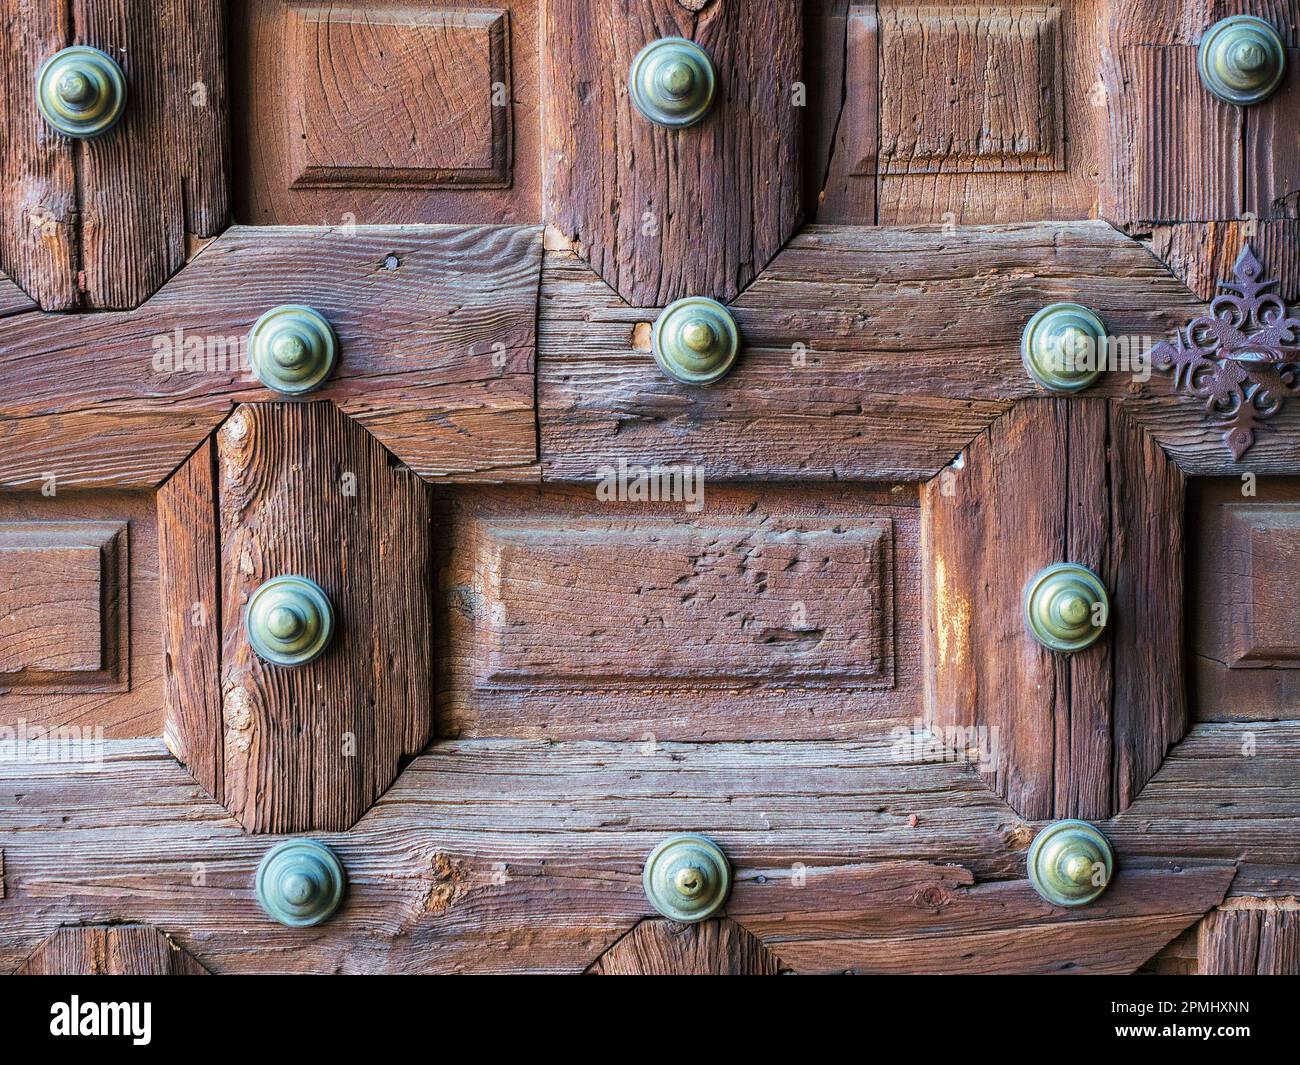 Wooden door of the Siguenza Cathedral Stock Photo